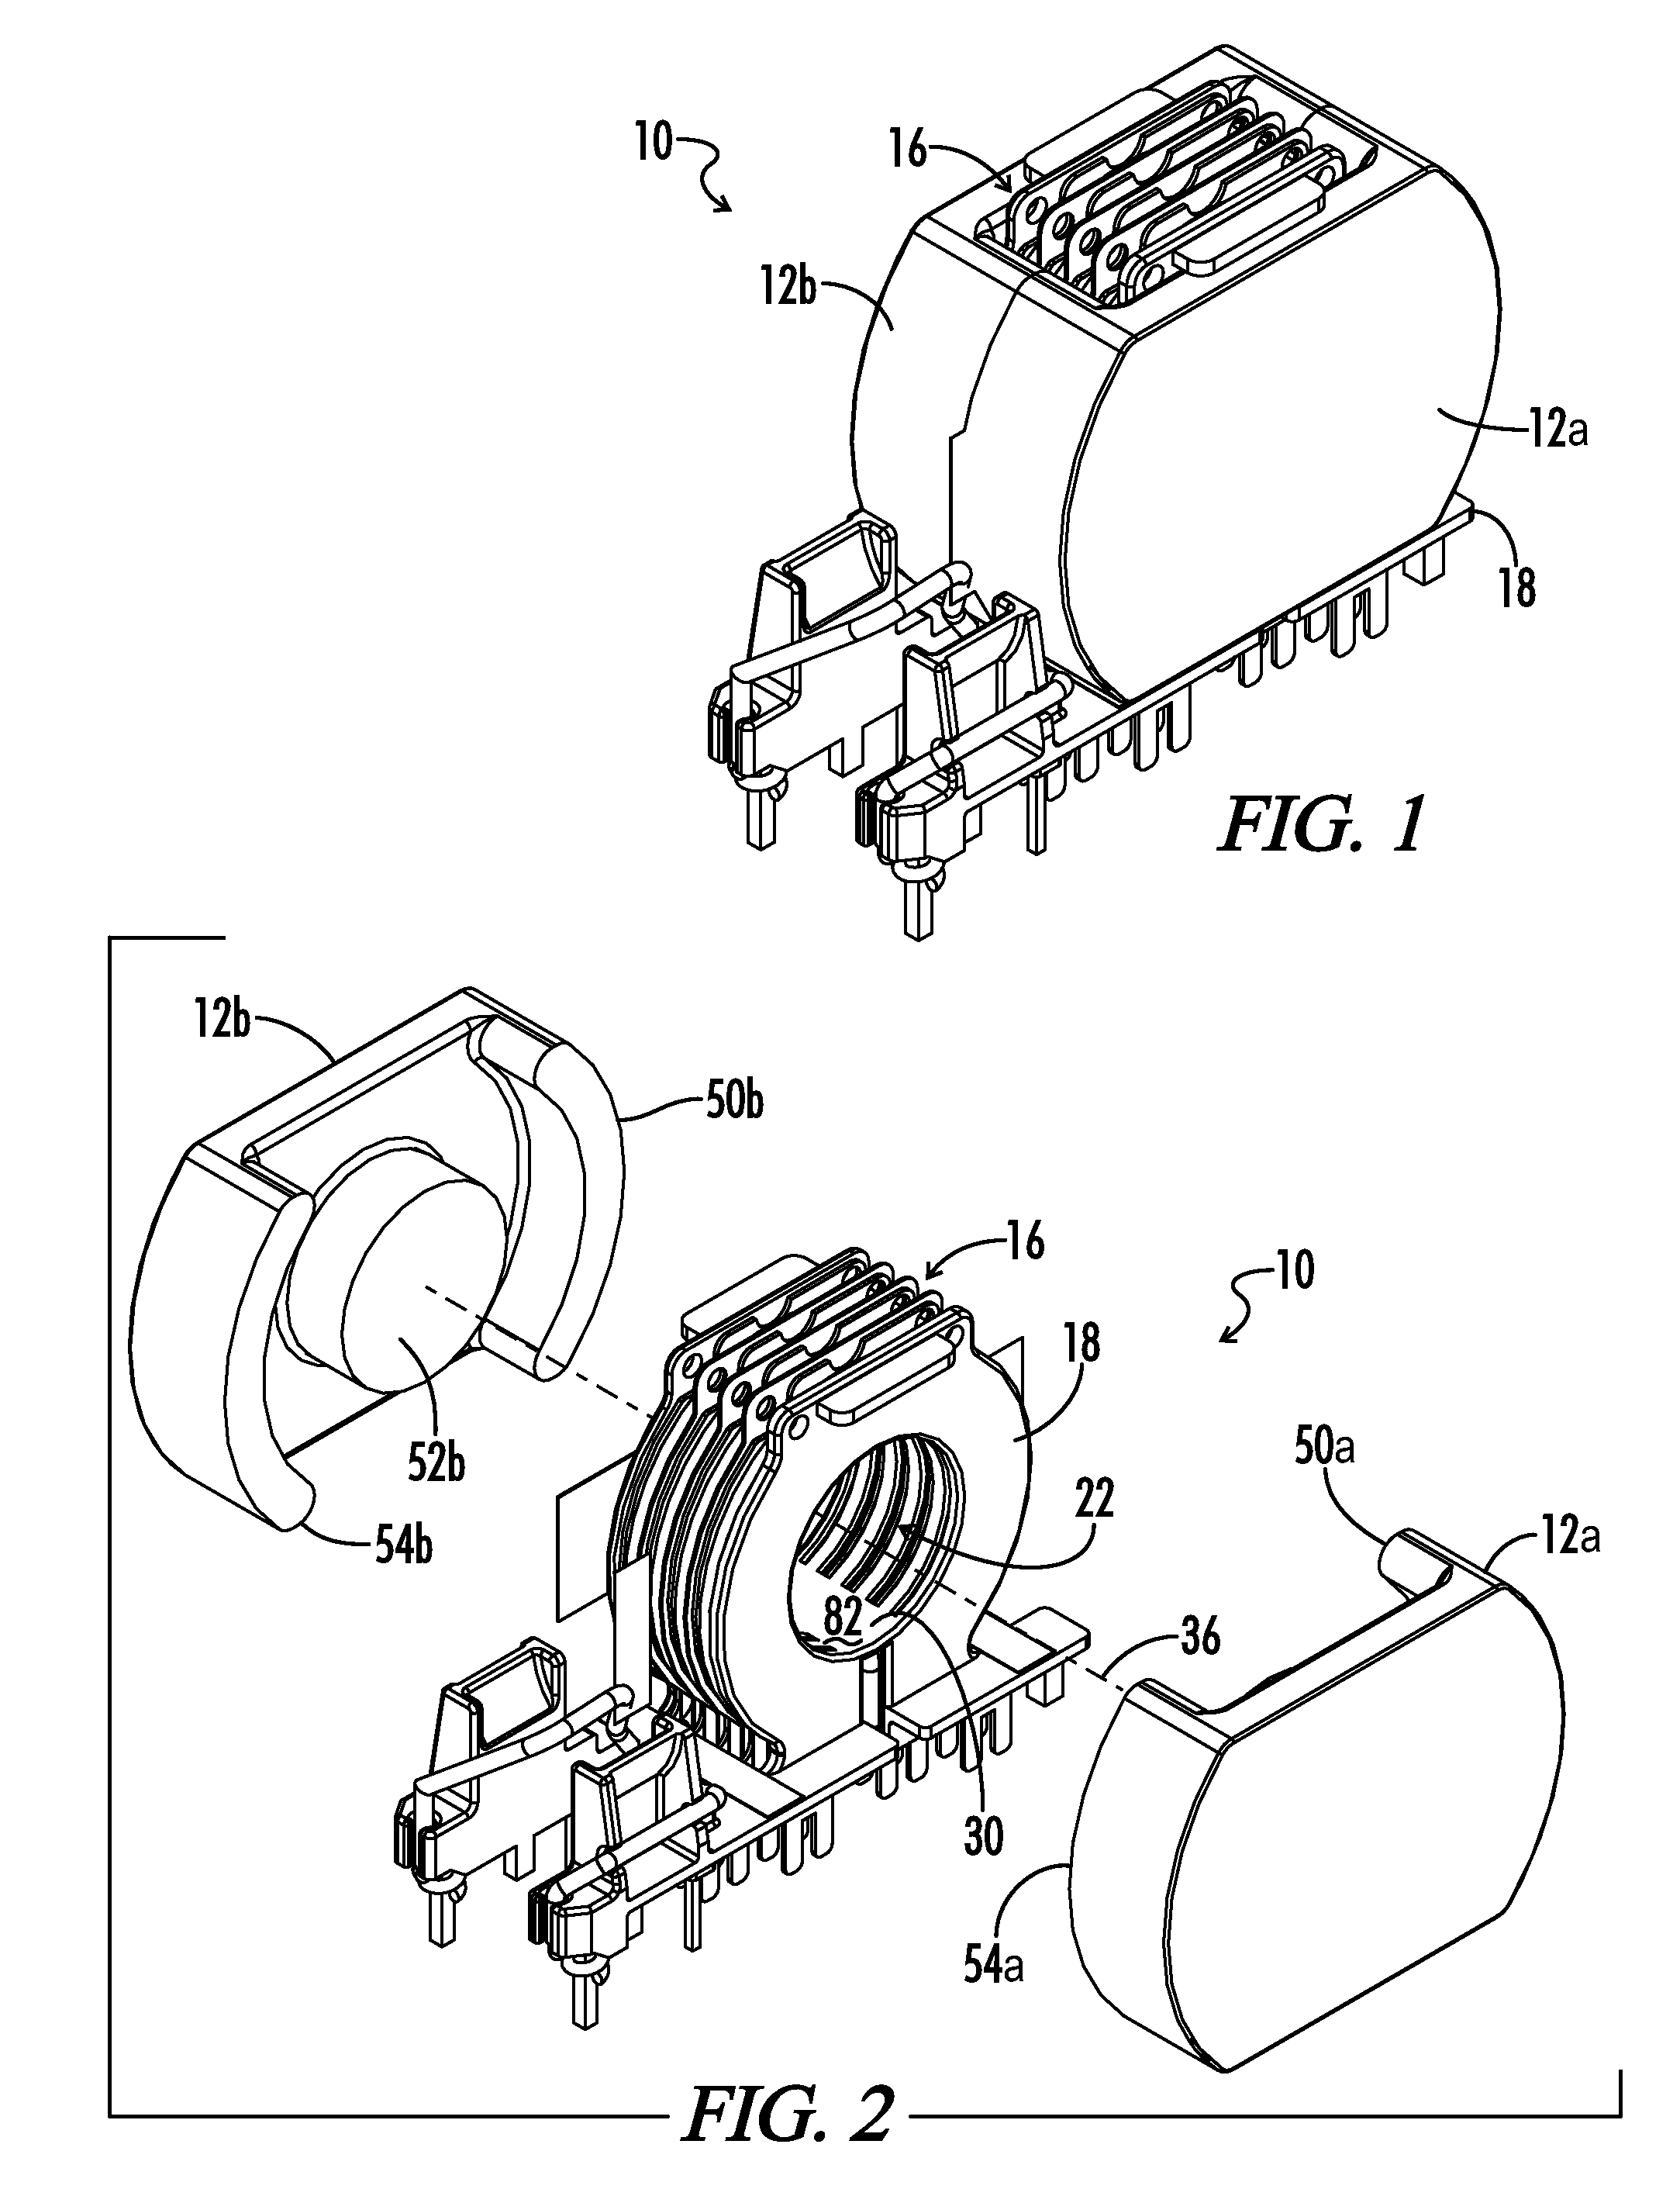 Slotted bobbin magnetic component devices and methods